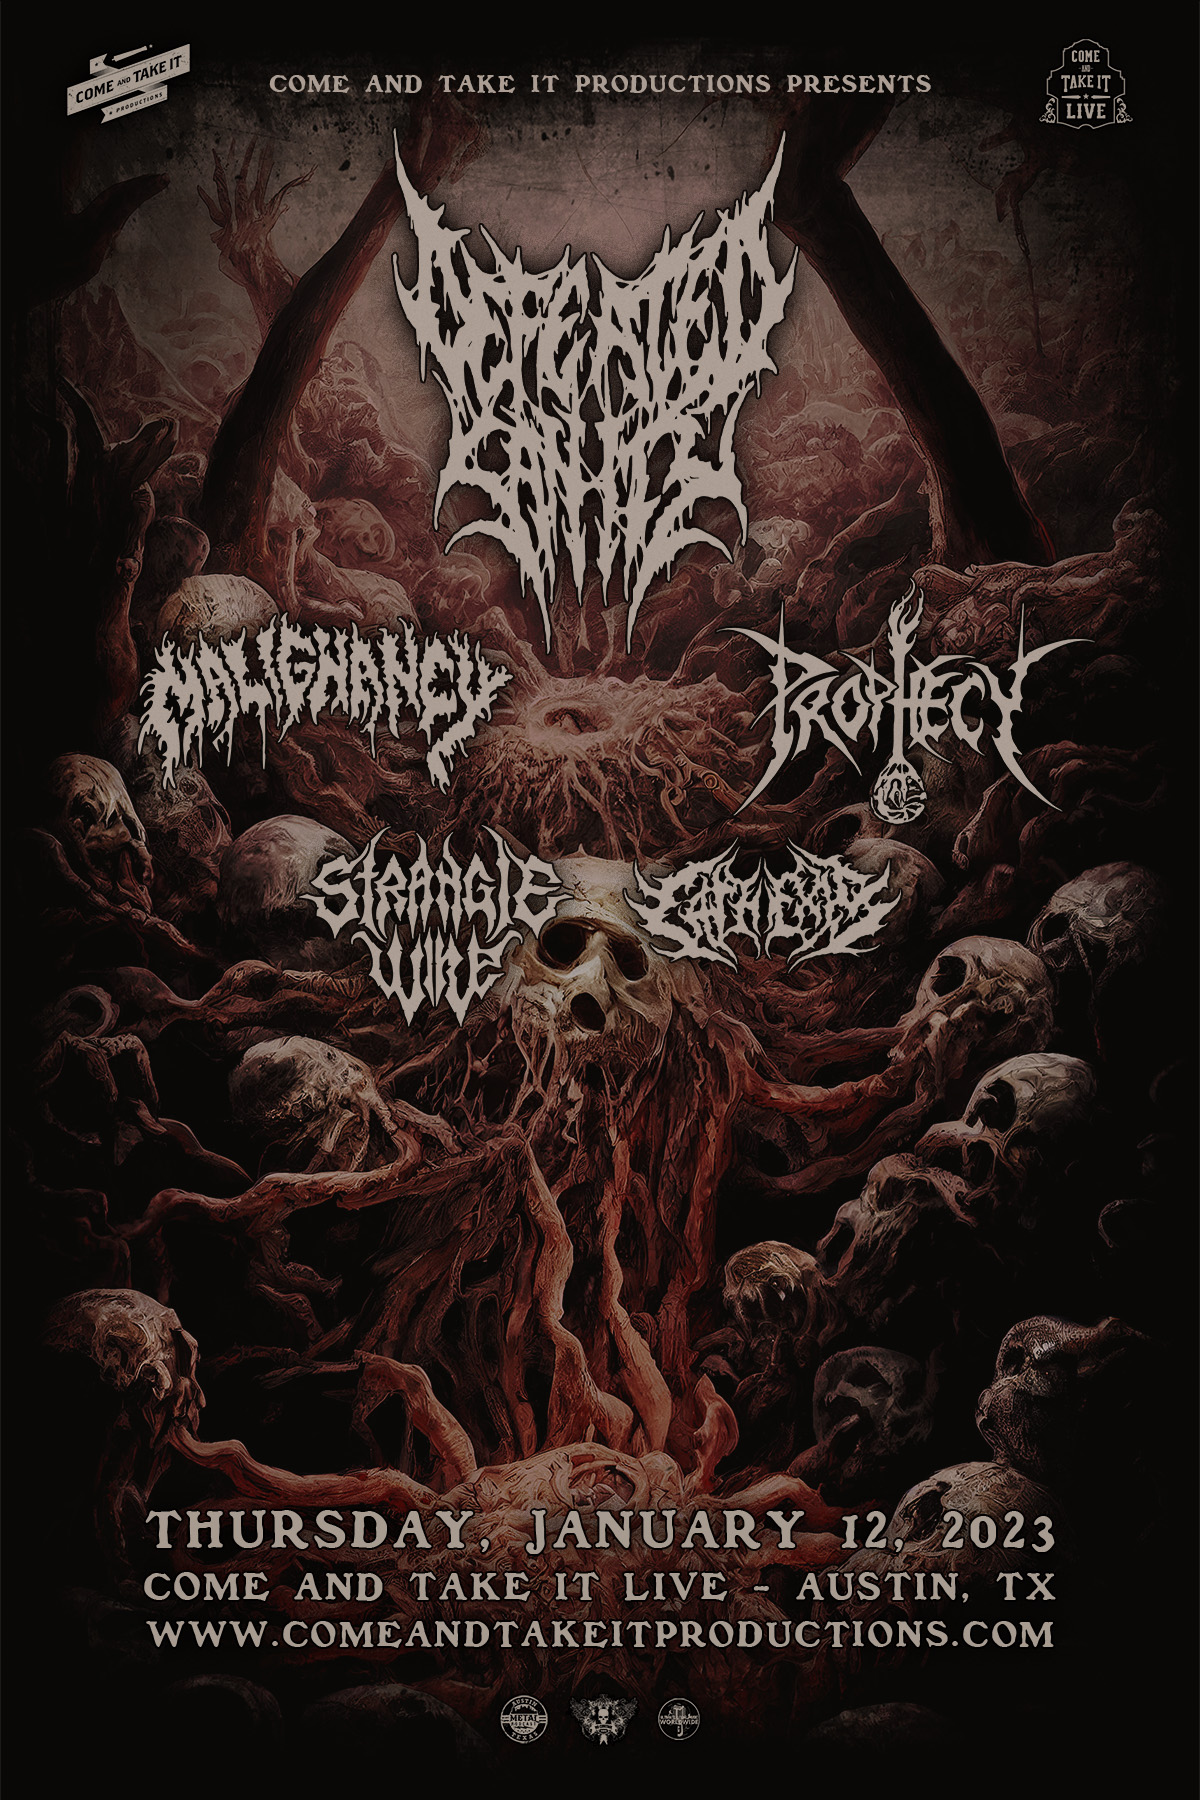 Defeated Sanity, Malignancy, Prophecy, and MORE